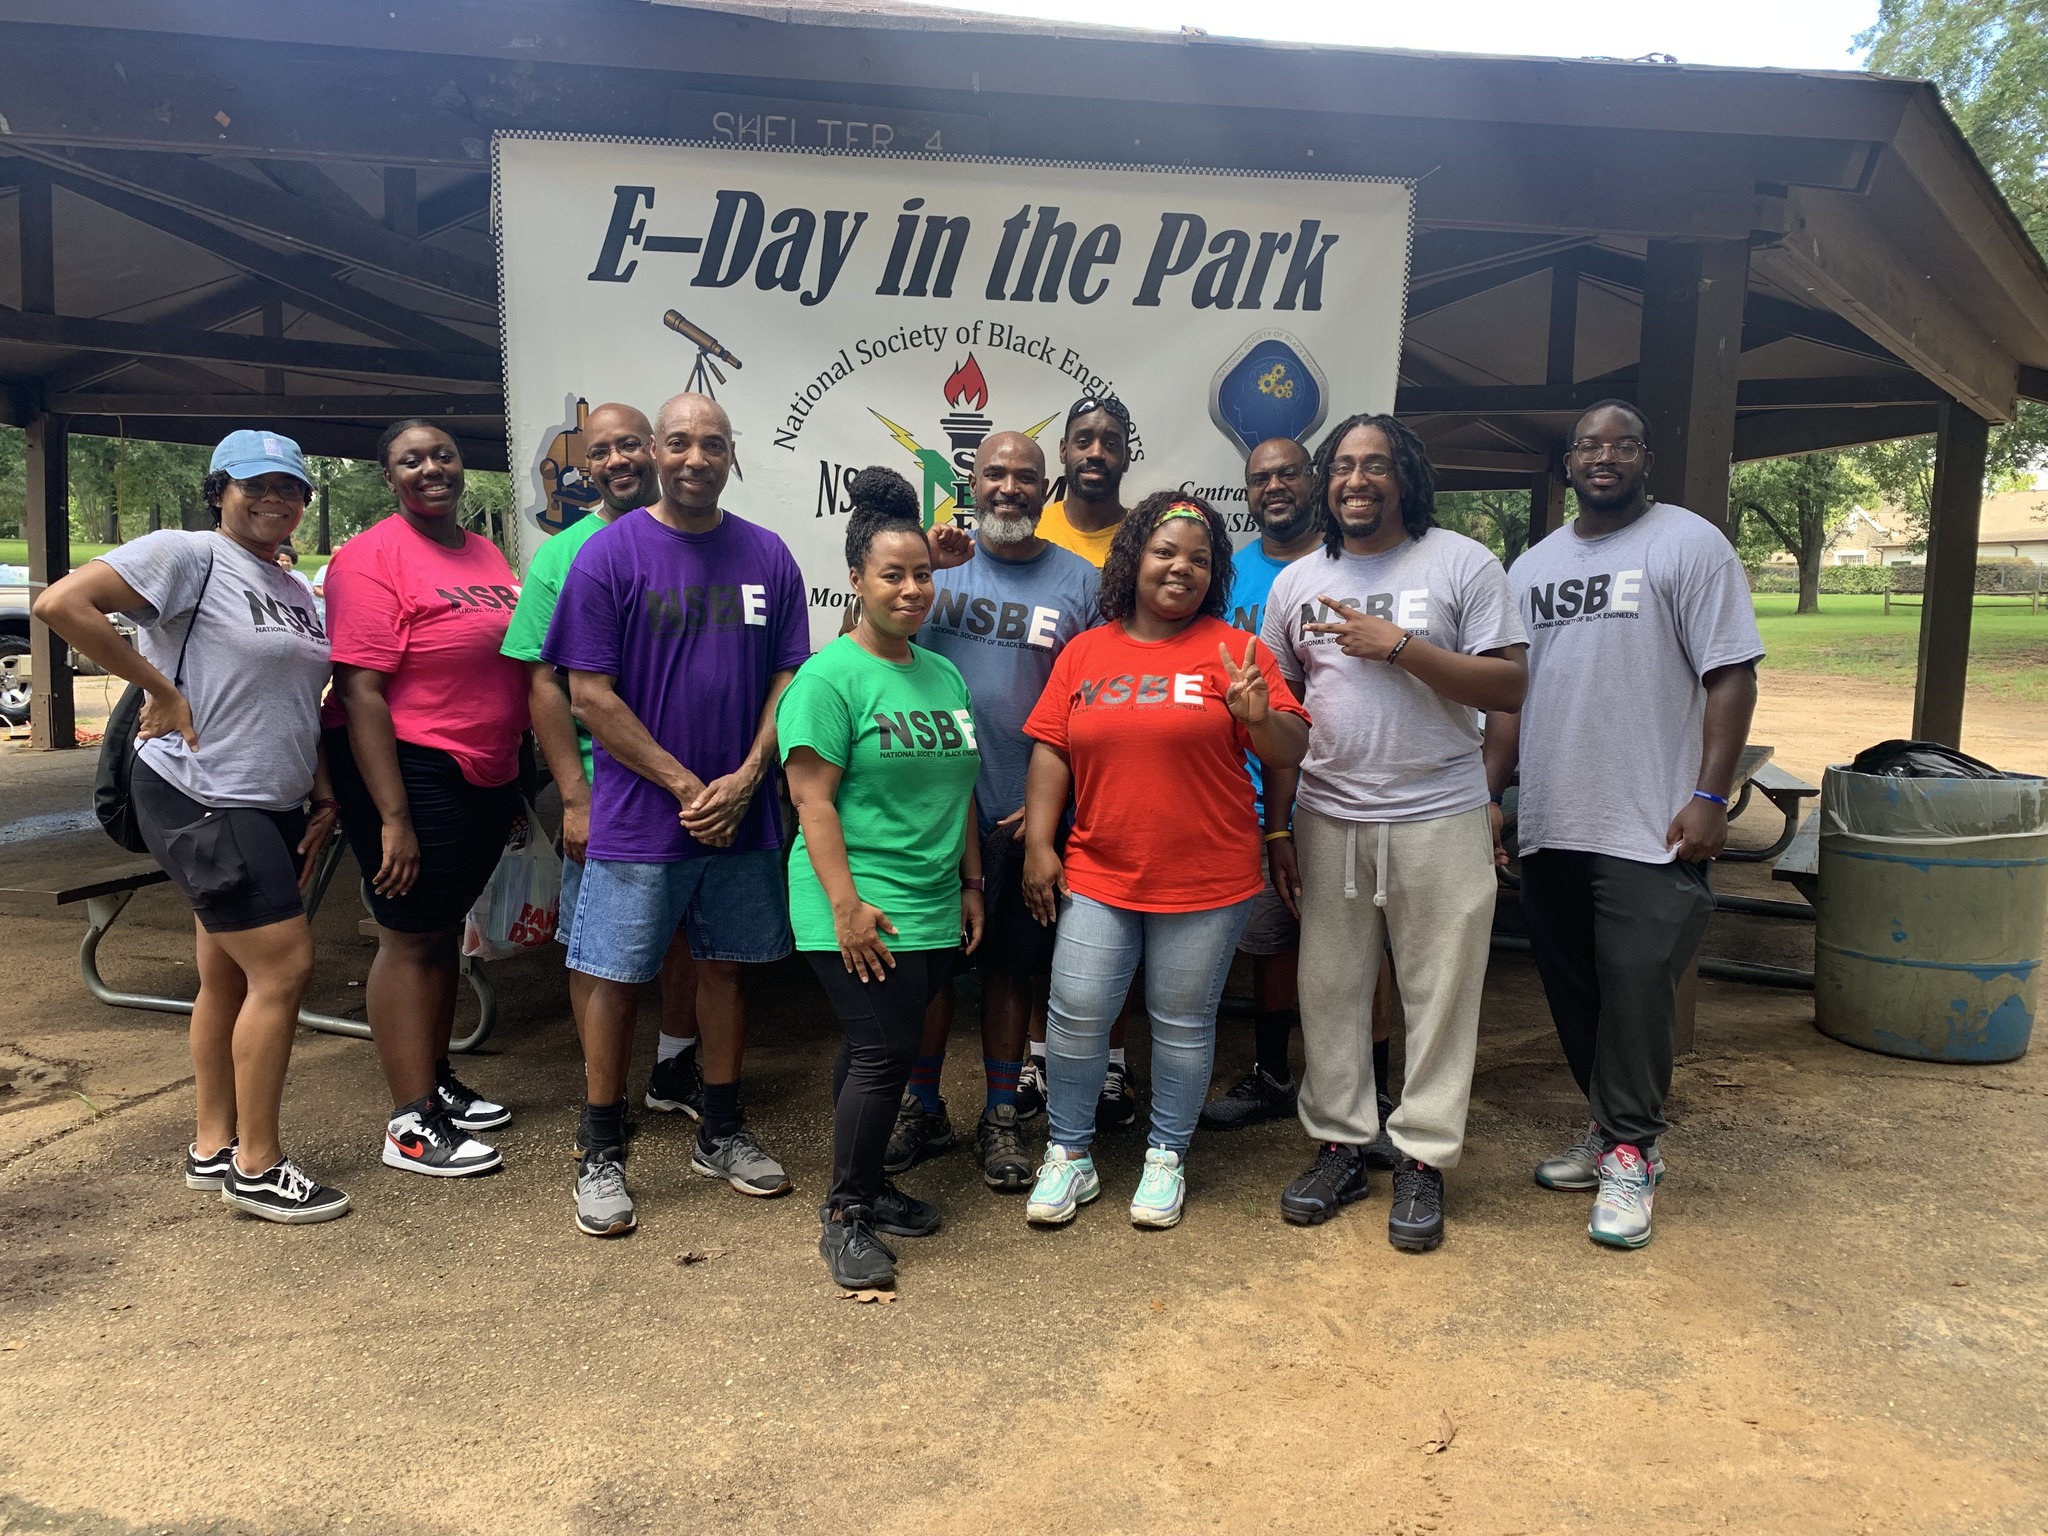 Read more about Engingeering Day at the Park